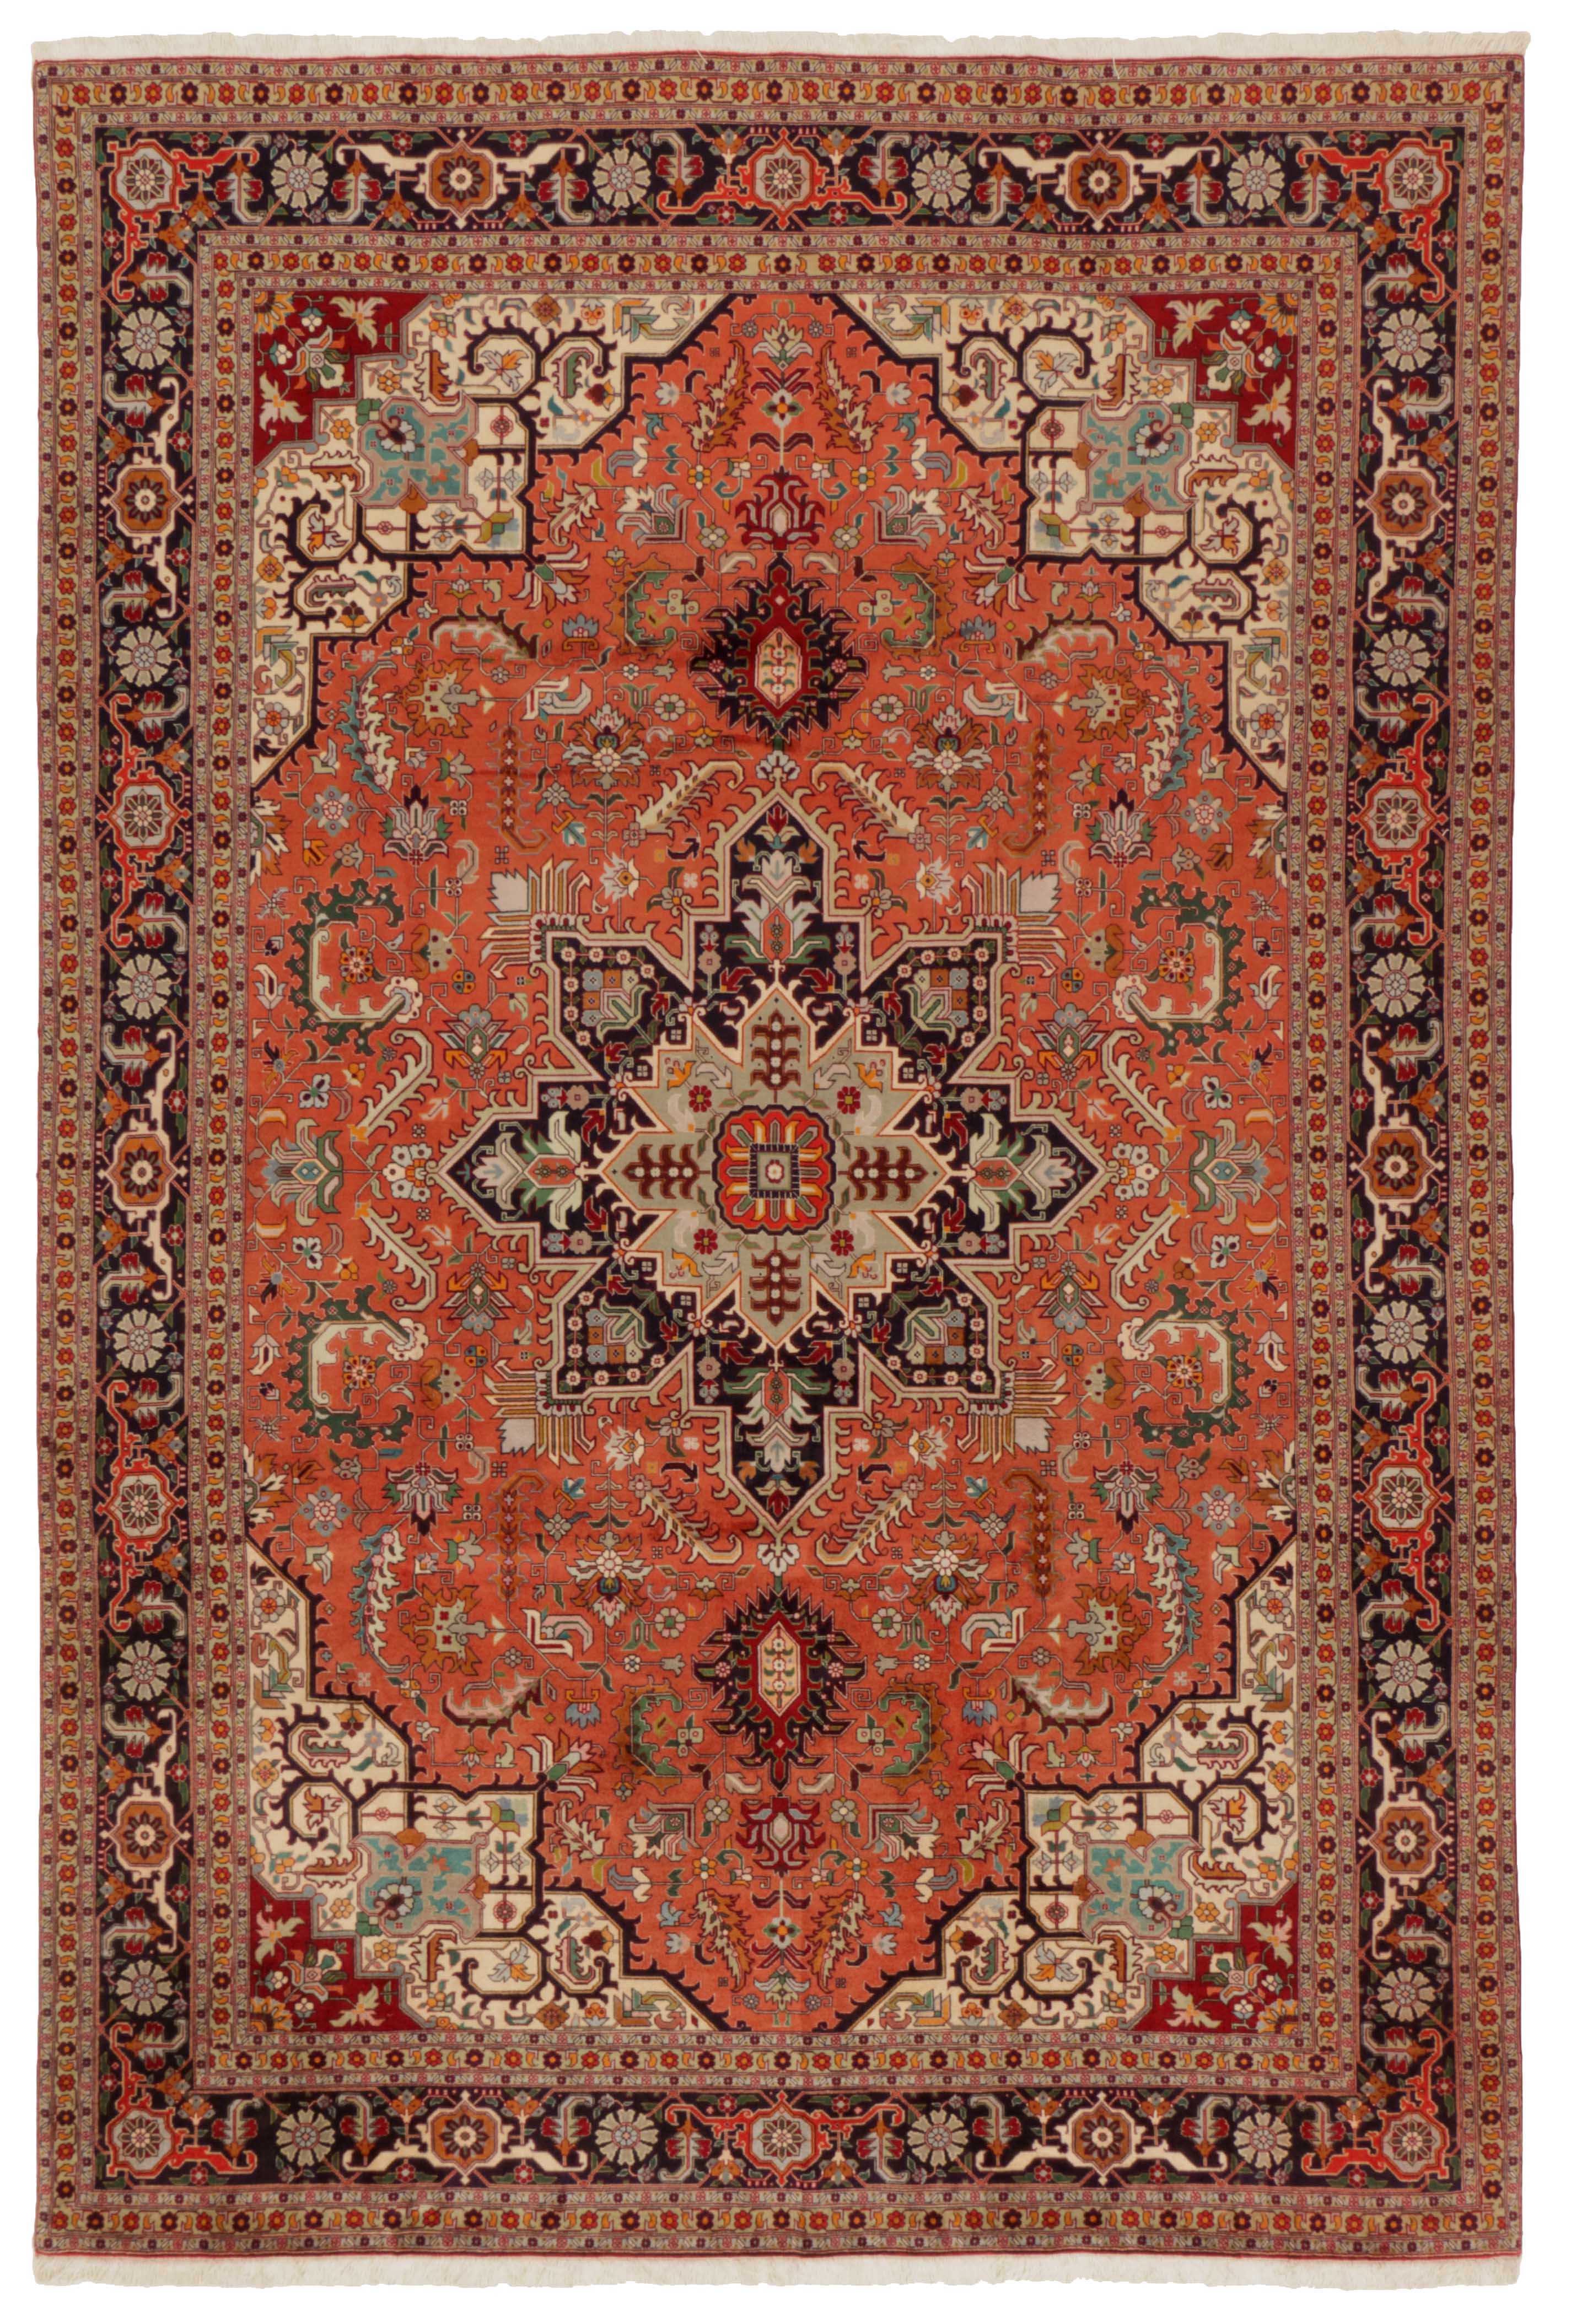 Authentic persian rug with traditional floral design in red, blue and white 